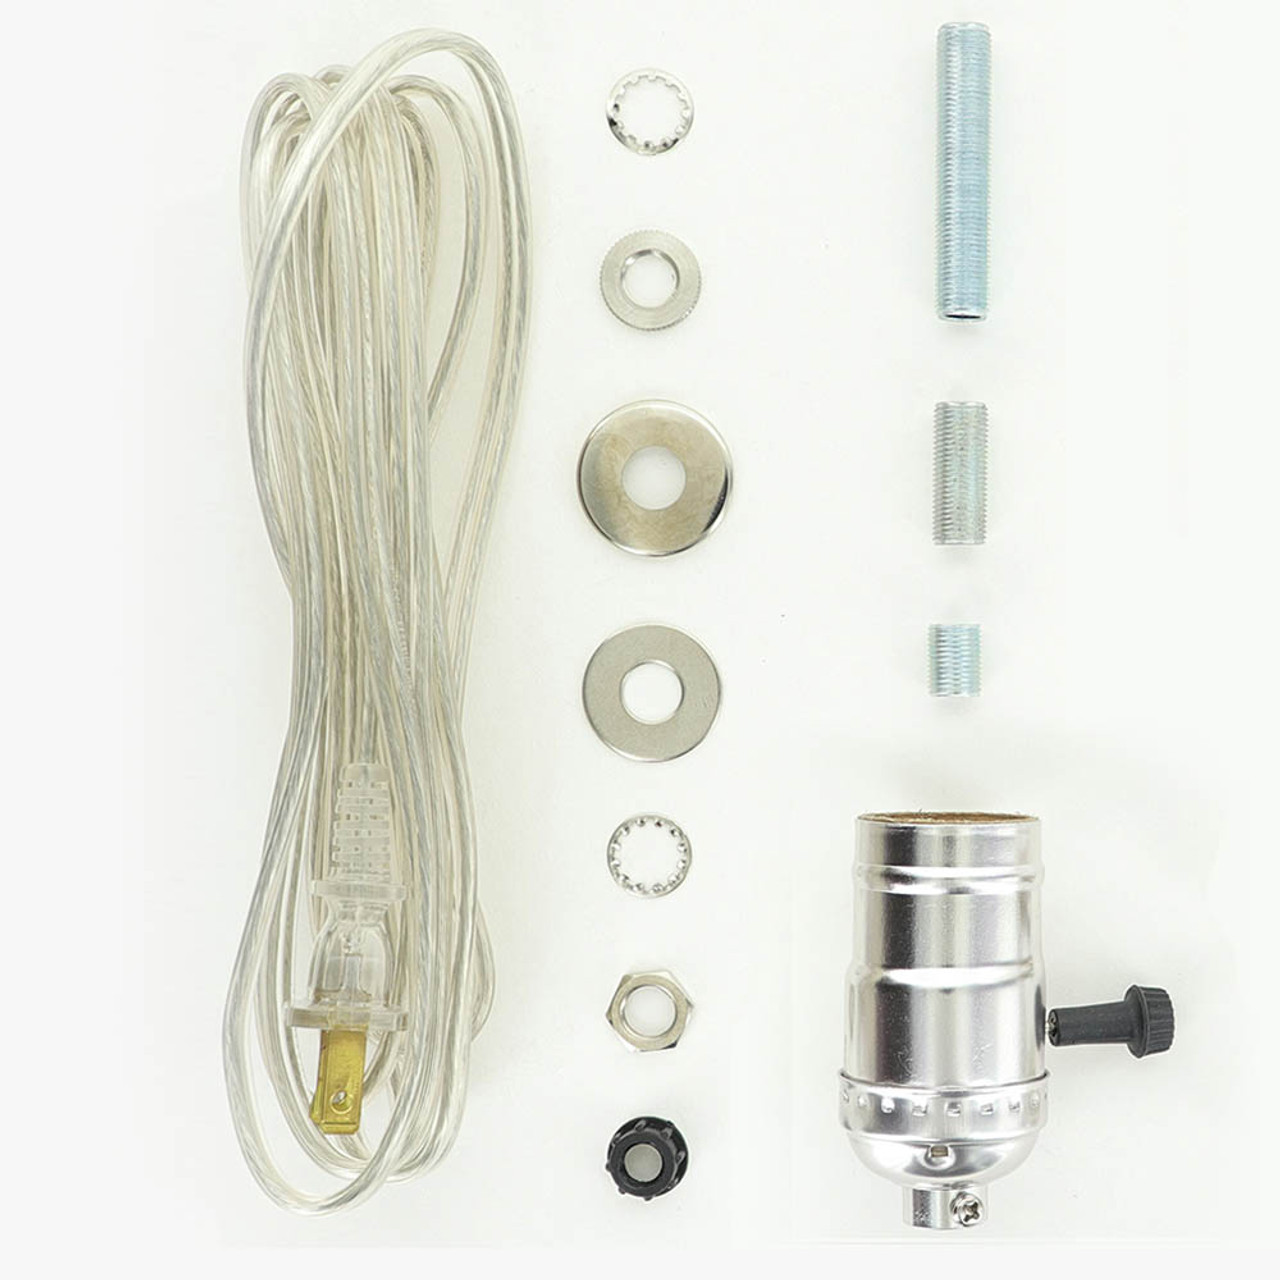 Easy-to-use Electric Lamp Wiring Kit Rewire a New Lamp, Rewire an